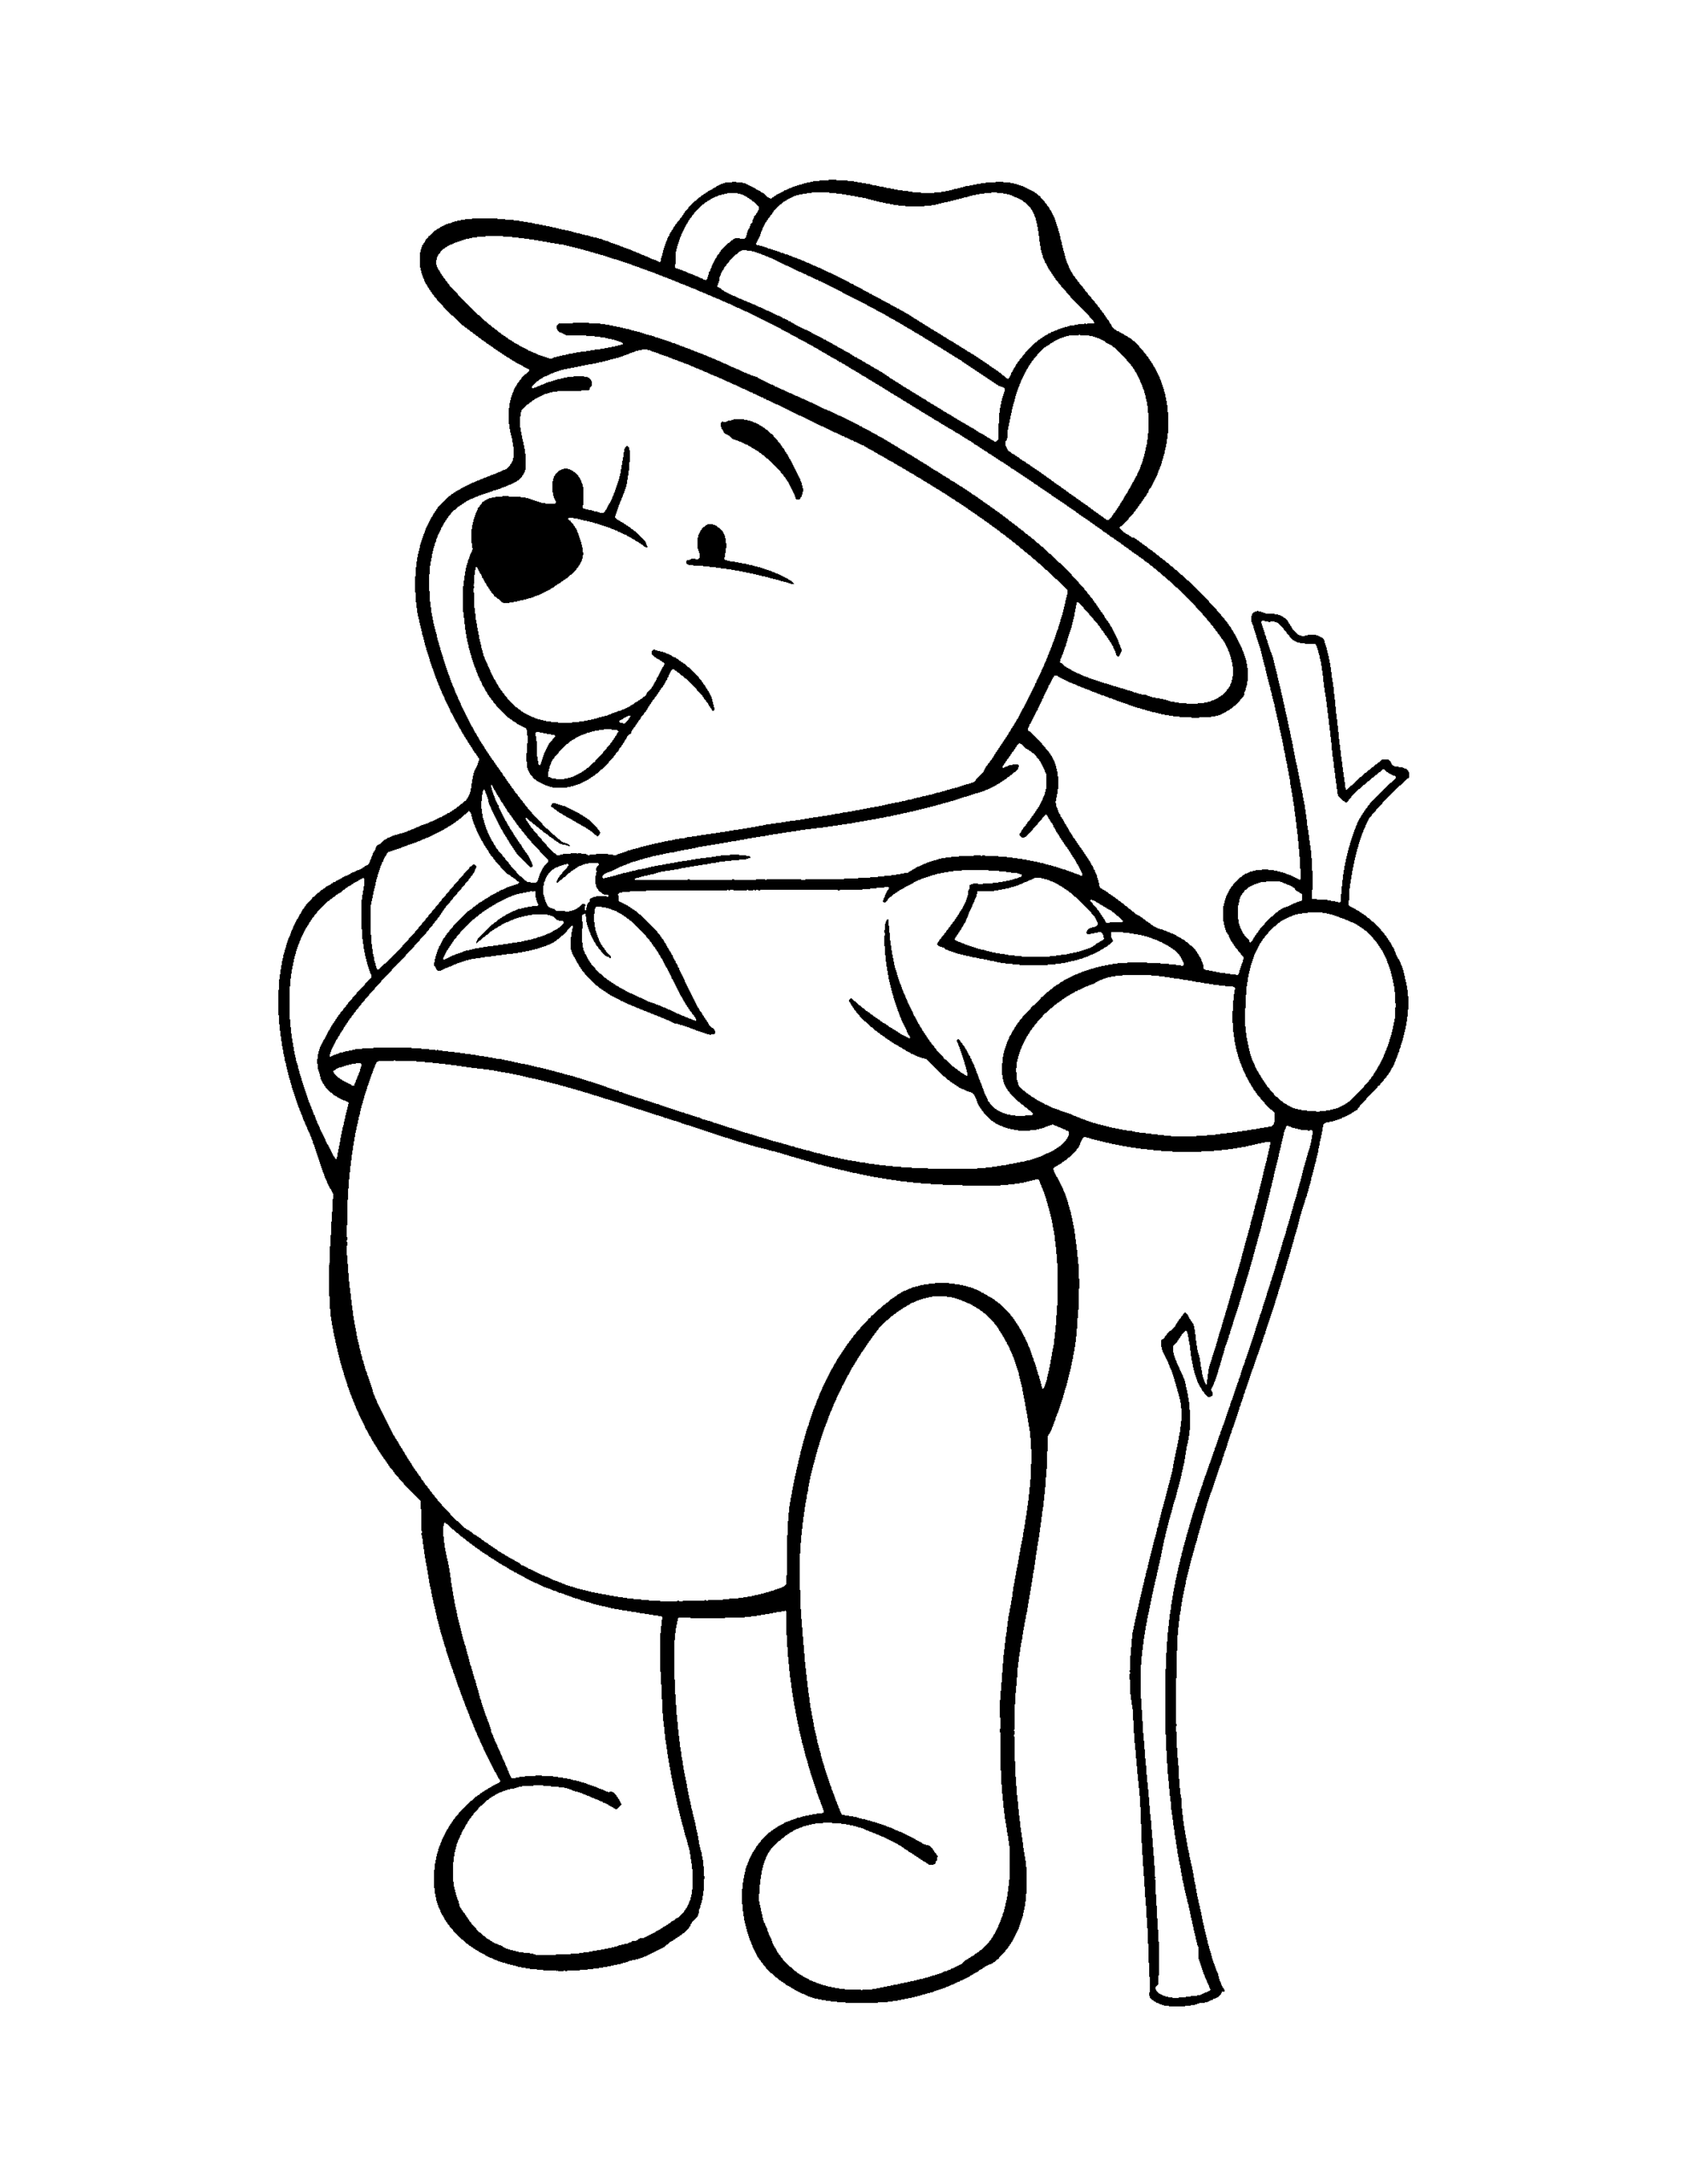 Winnie the Pooh Coloring Pages Cartoons Winnie The Pooh Printable 2020 6943 Coloring4free